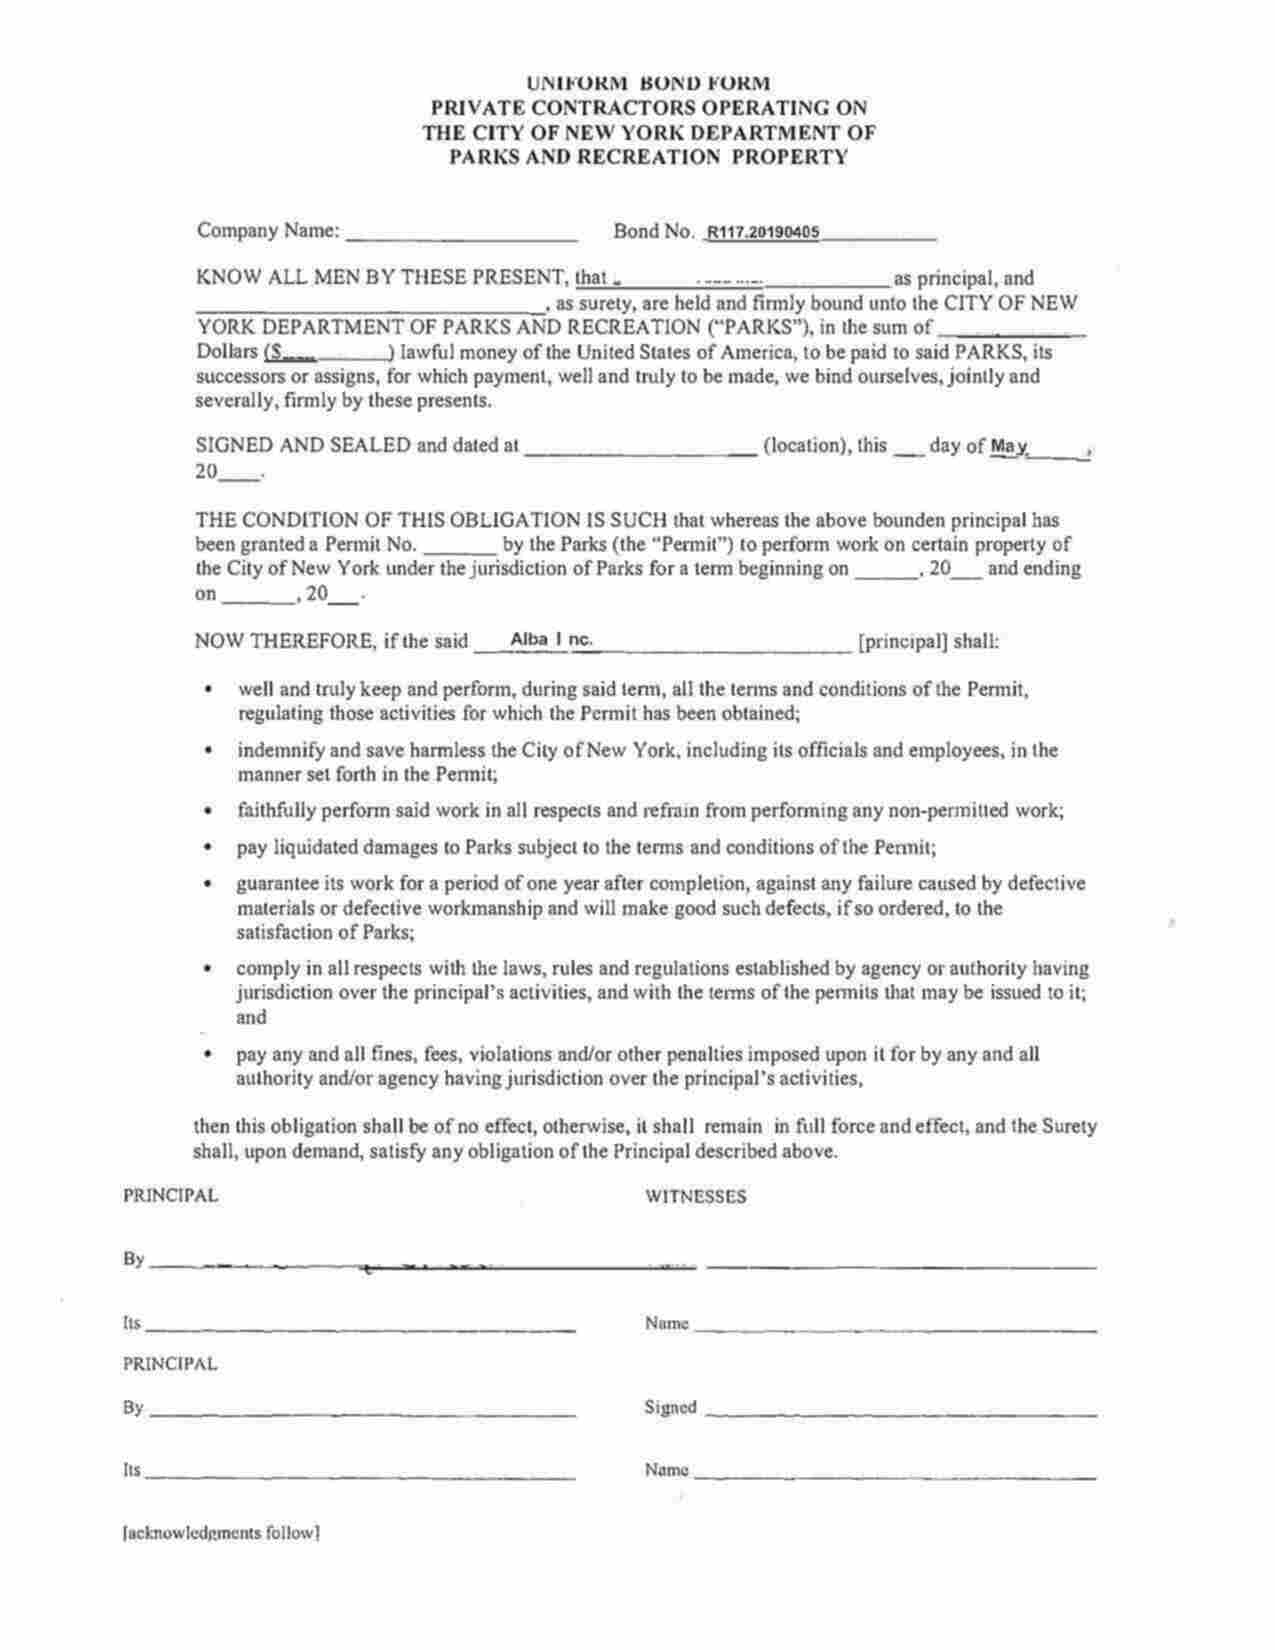 New York Private Contractors Permit (NYC Parks) Bond Form